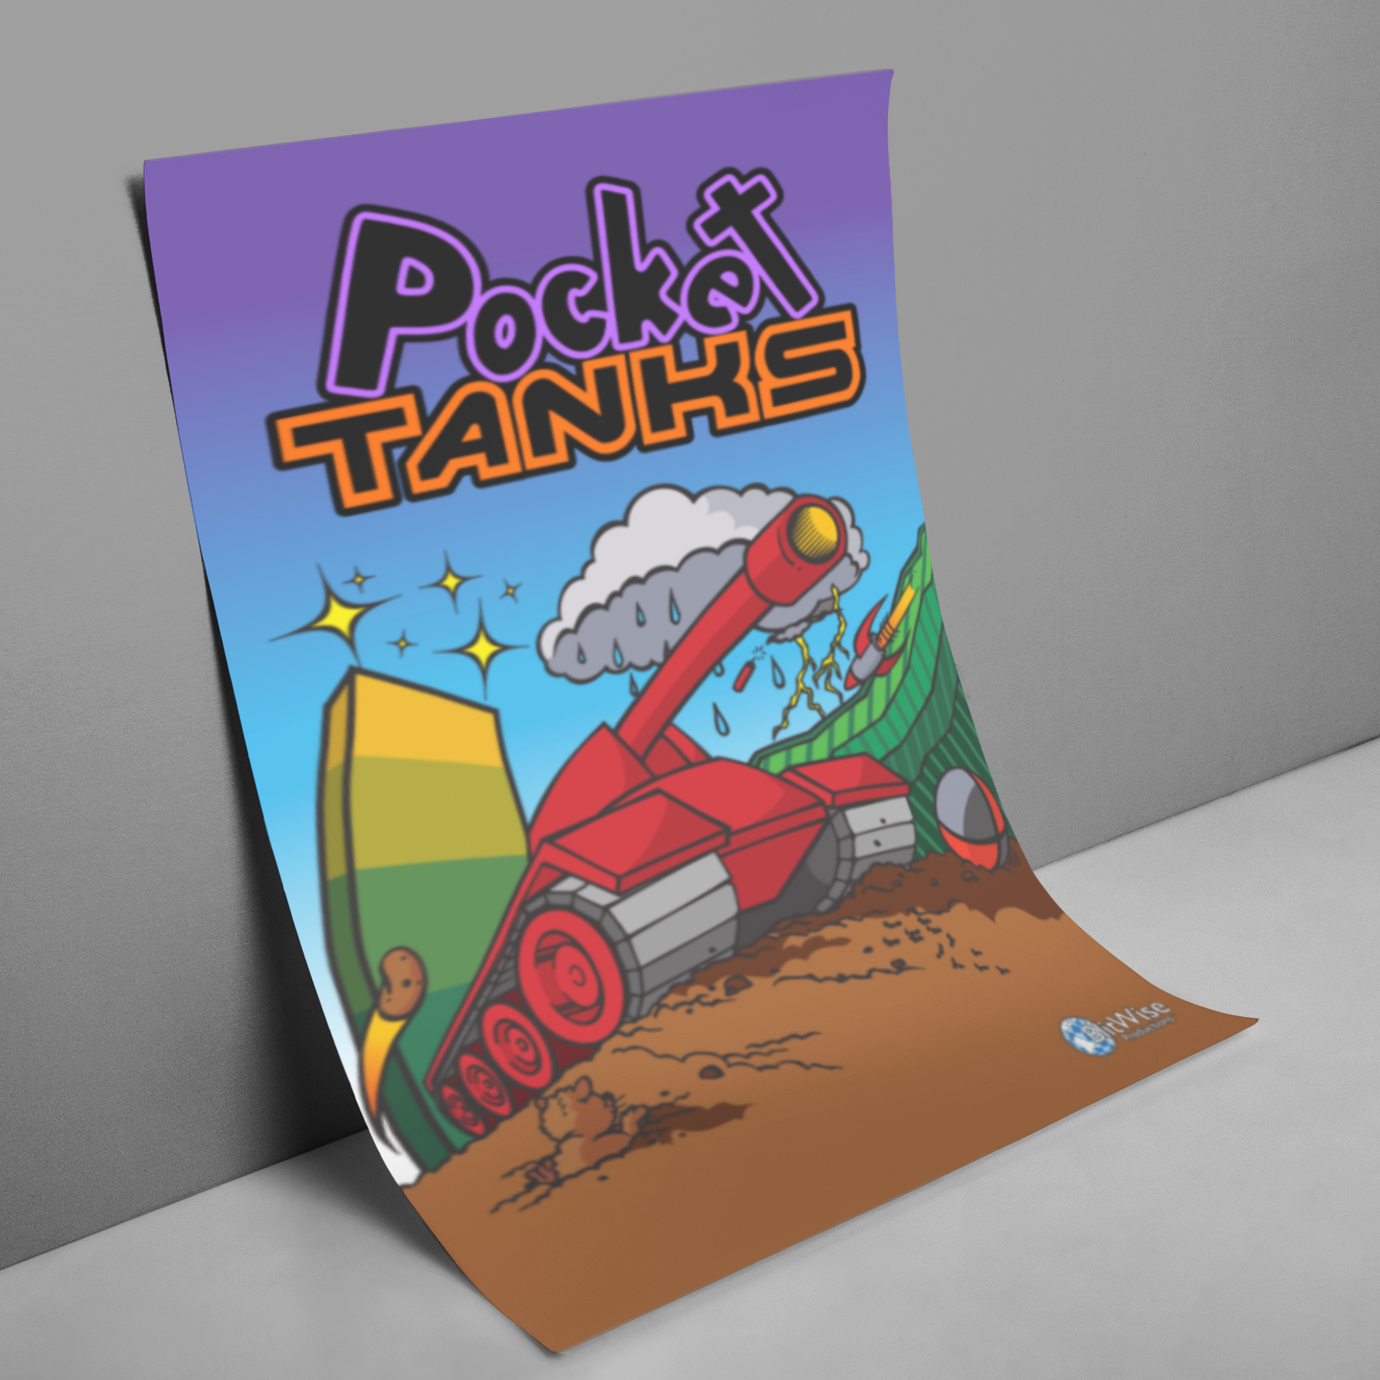 Pockets tanks is out !! - Release Announcements 